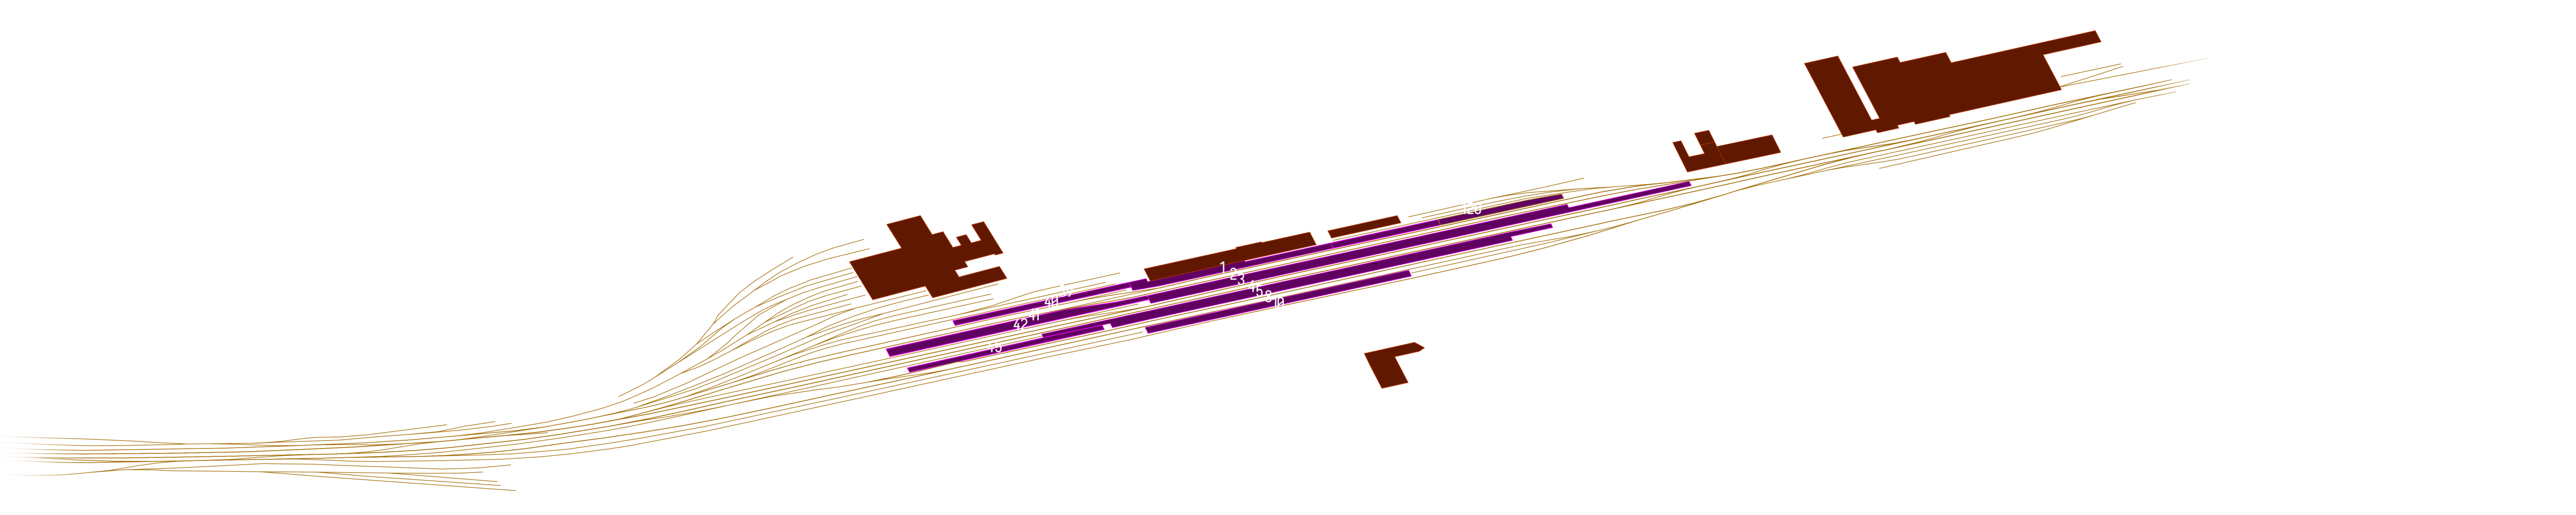 Station Layout of Kaiserslautern Hbf. Woe to the unprepared!   (and thanks to the people who mapped this in OSM!)